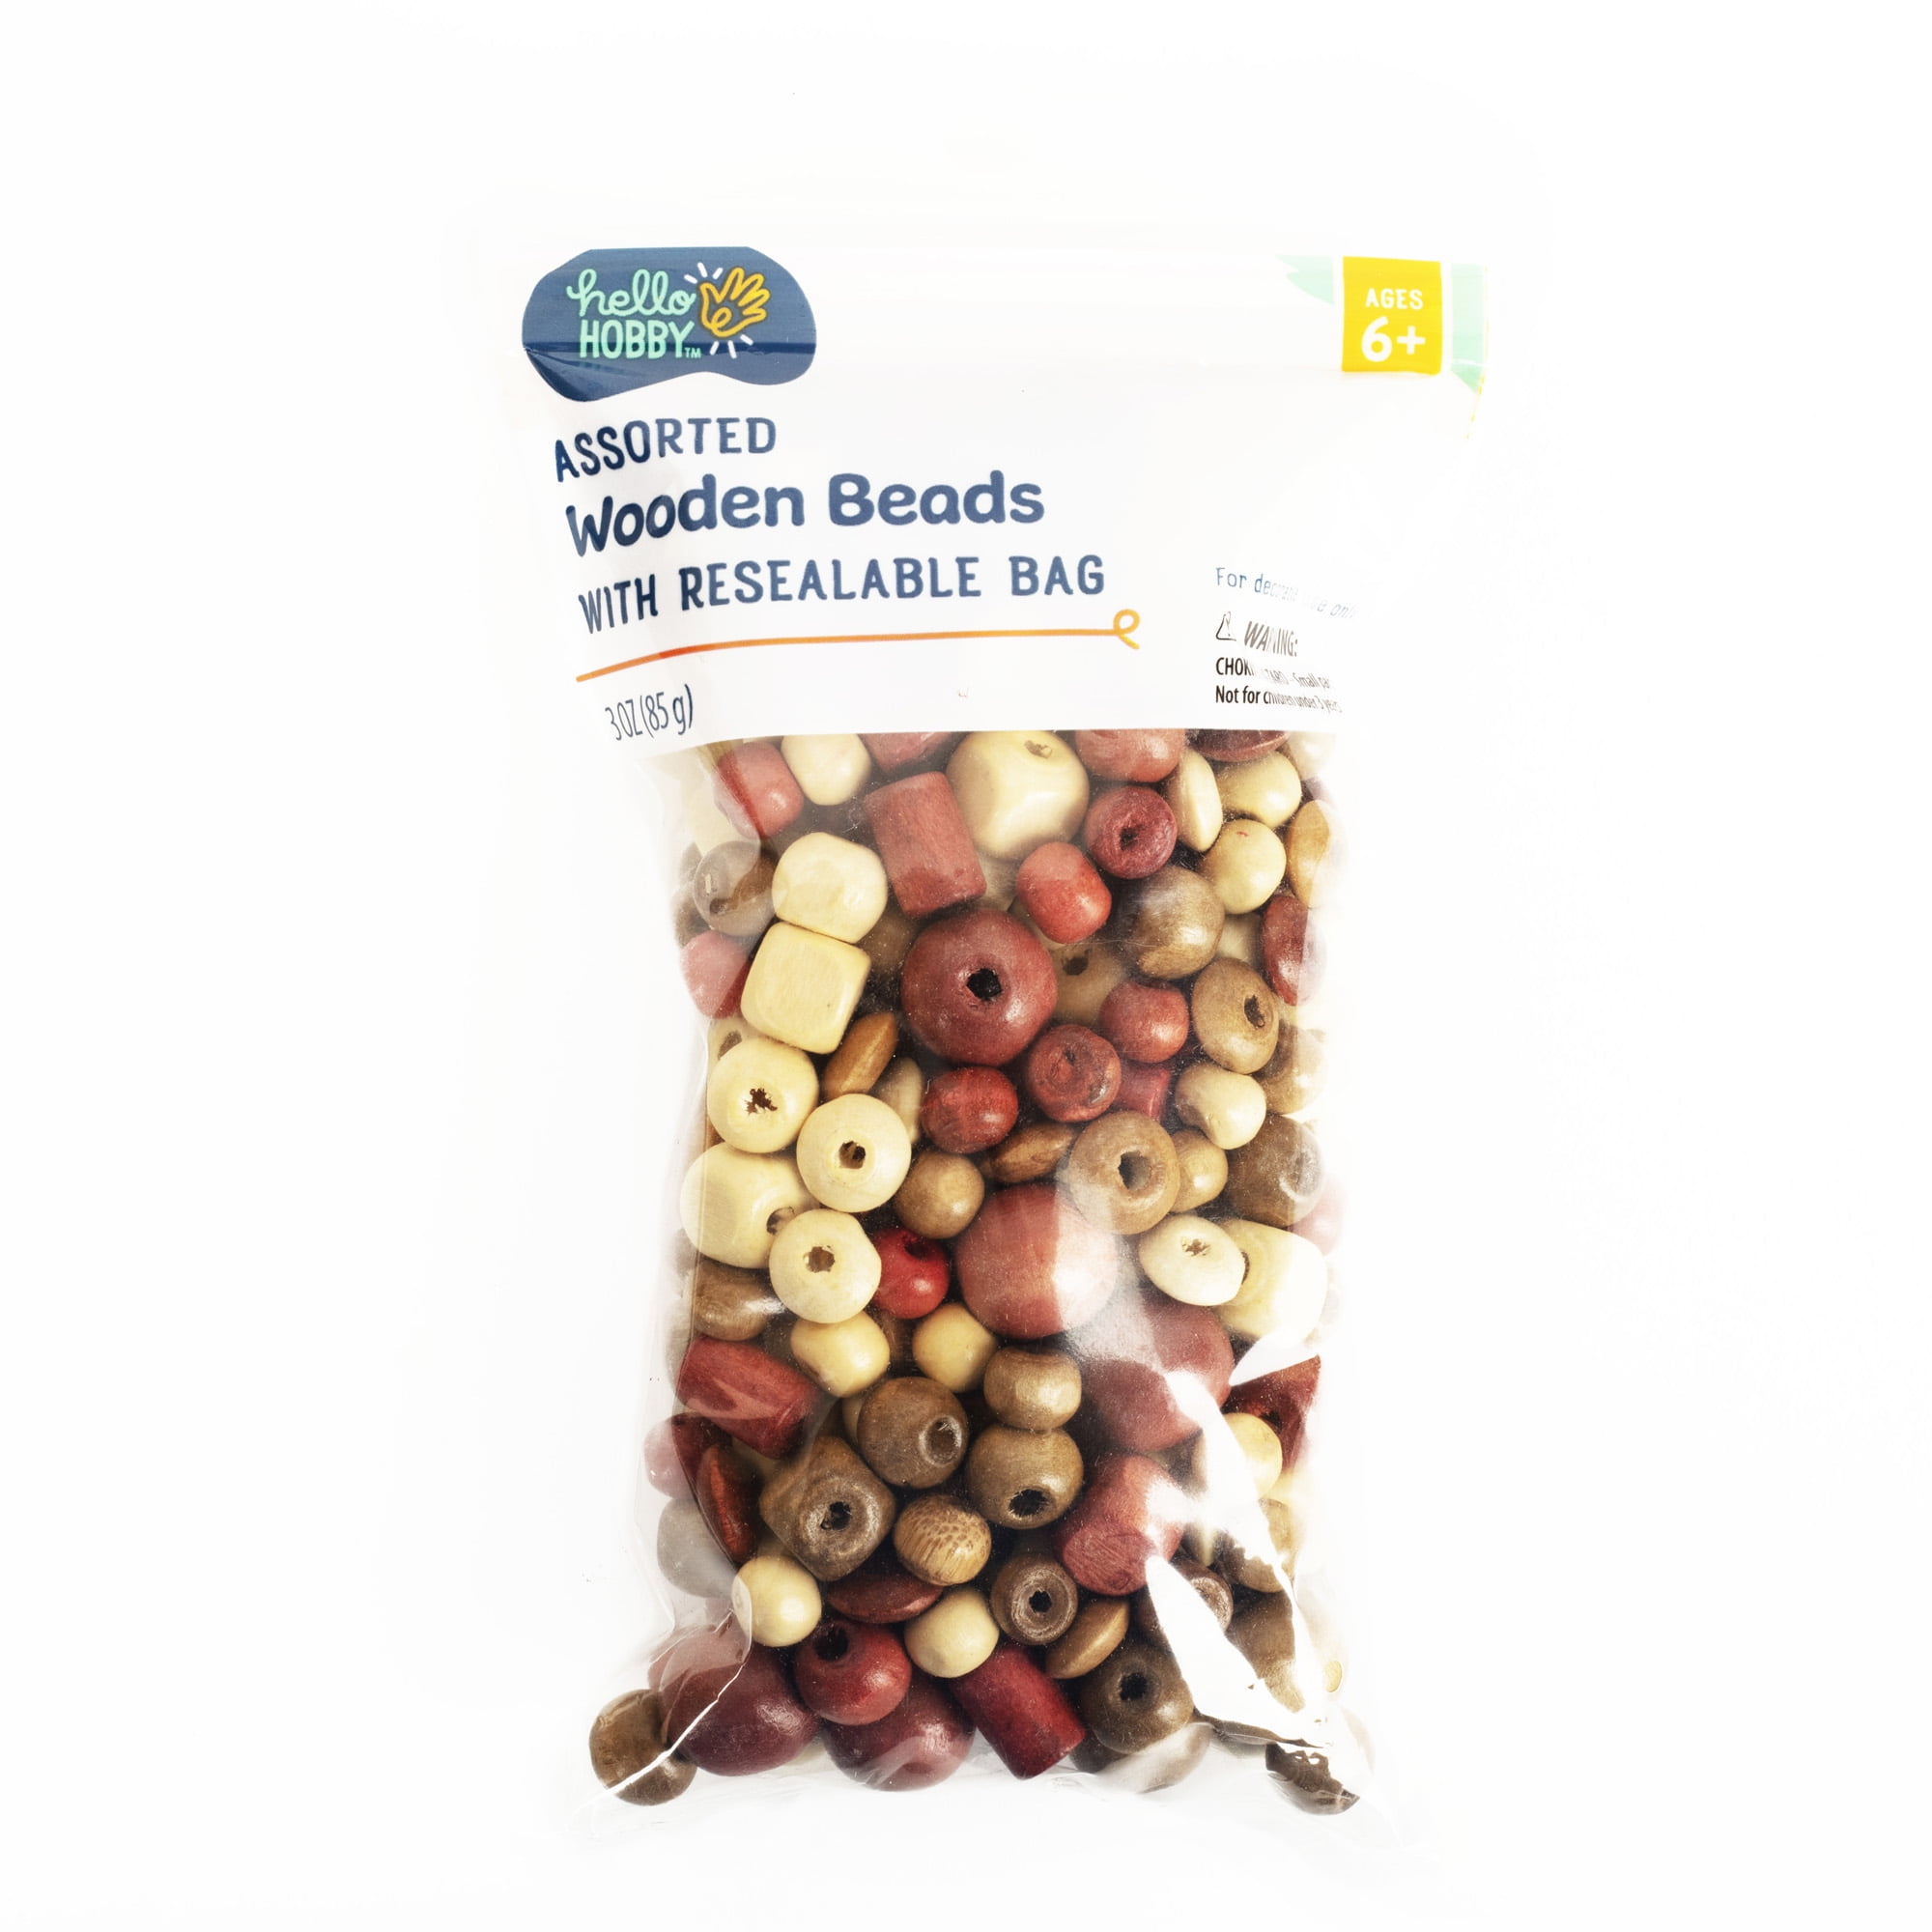 Hello Hobby Wood Bead Mix, Assorted Color, Size and Shape, 3 oz, 250+ Pieces